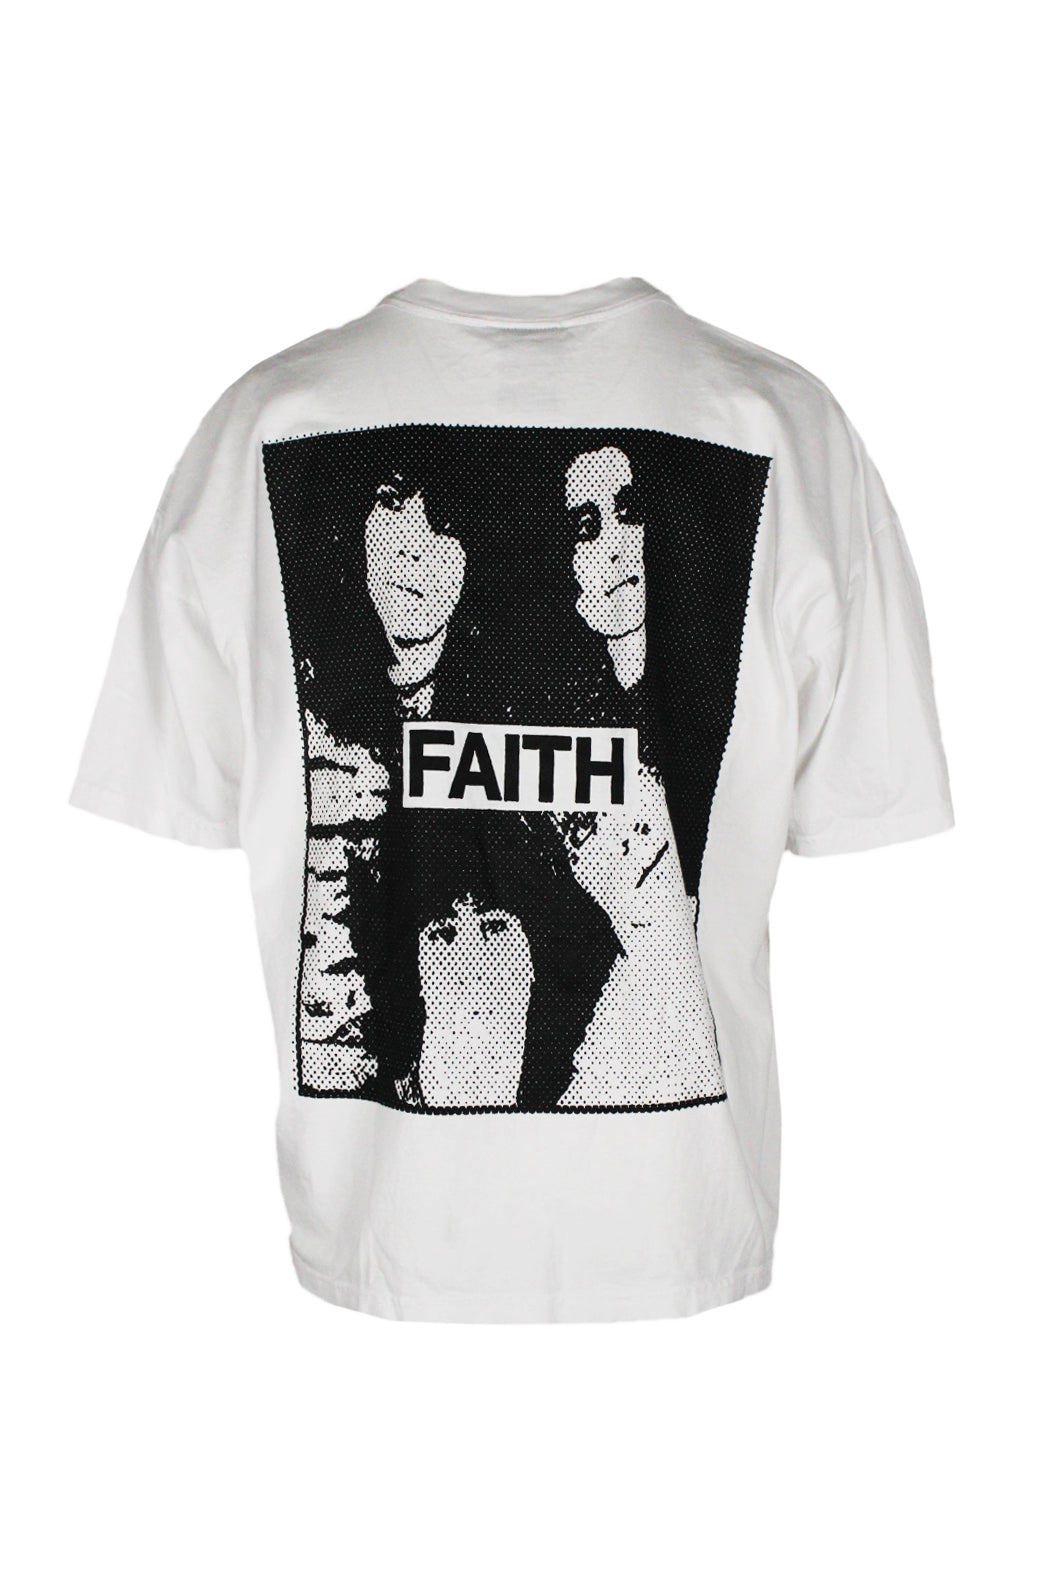 rear view with 'faith' graphic printed at back of shirt.